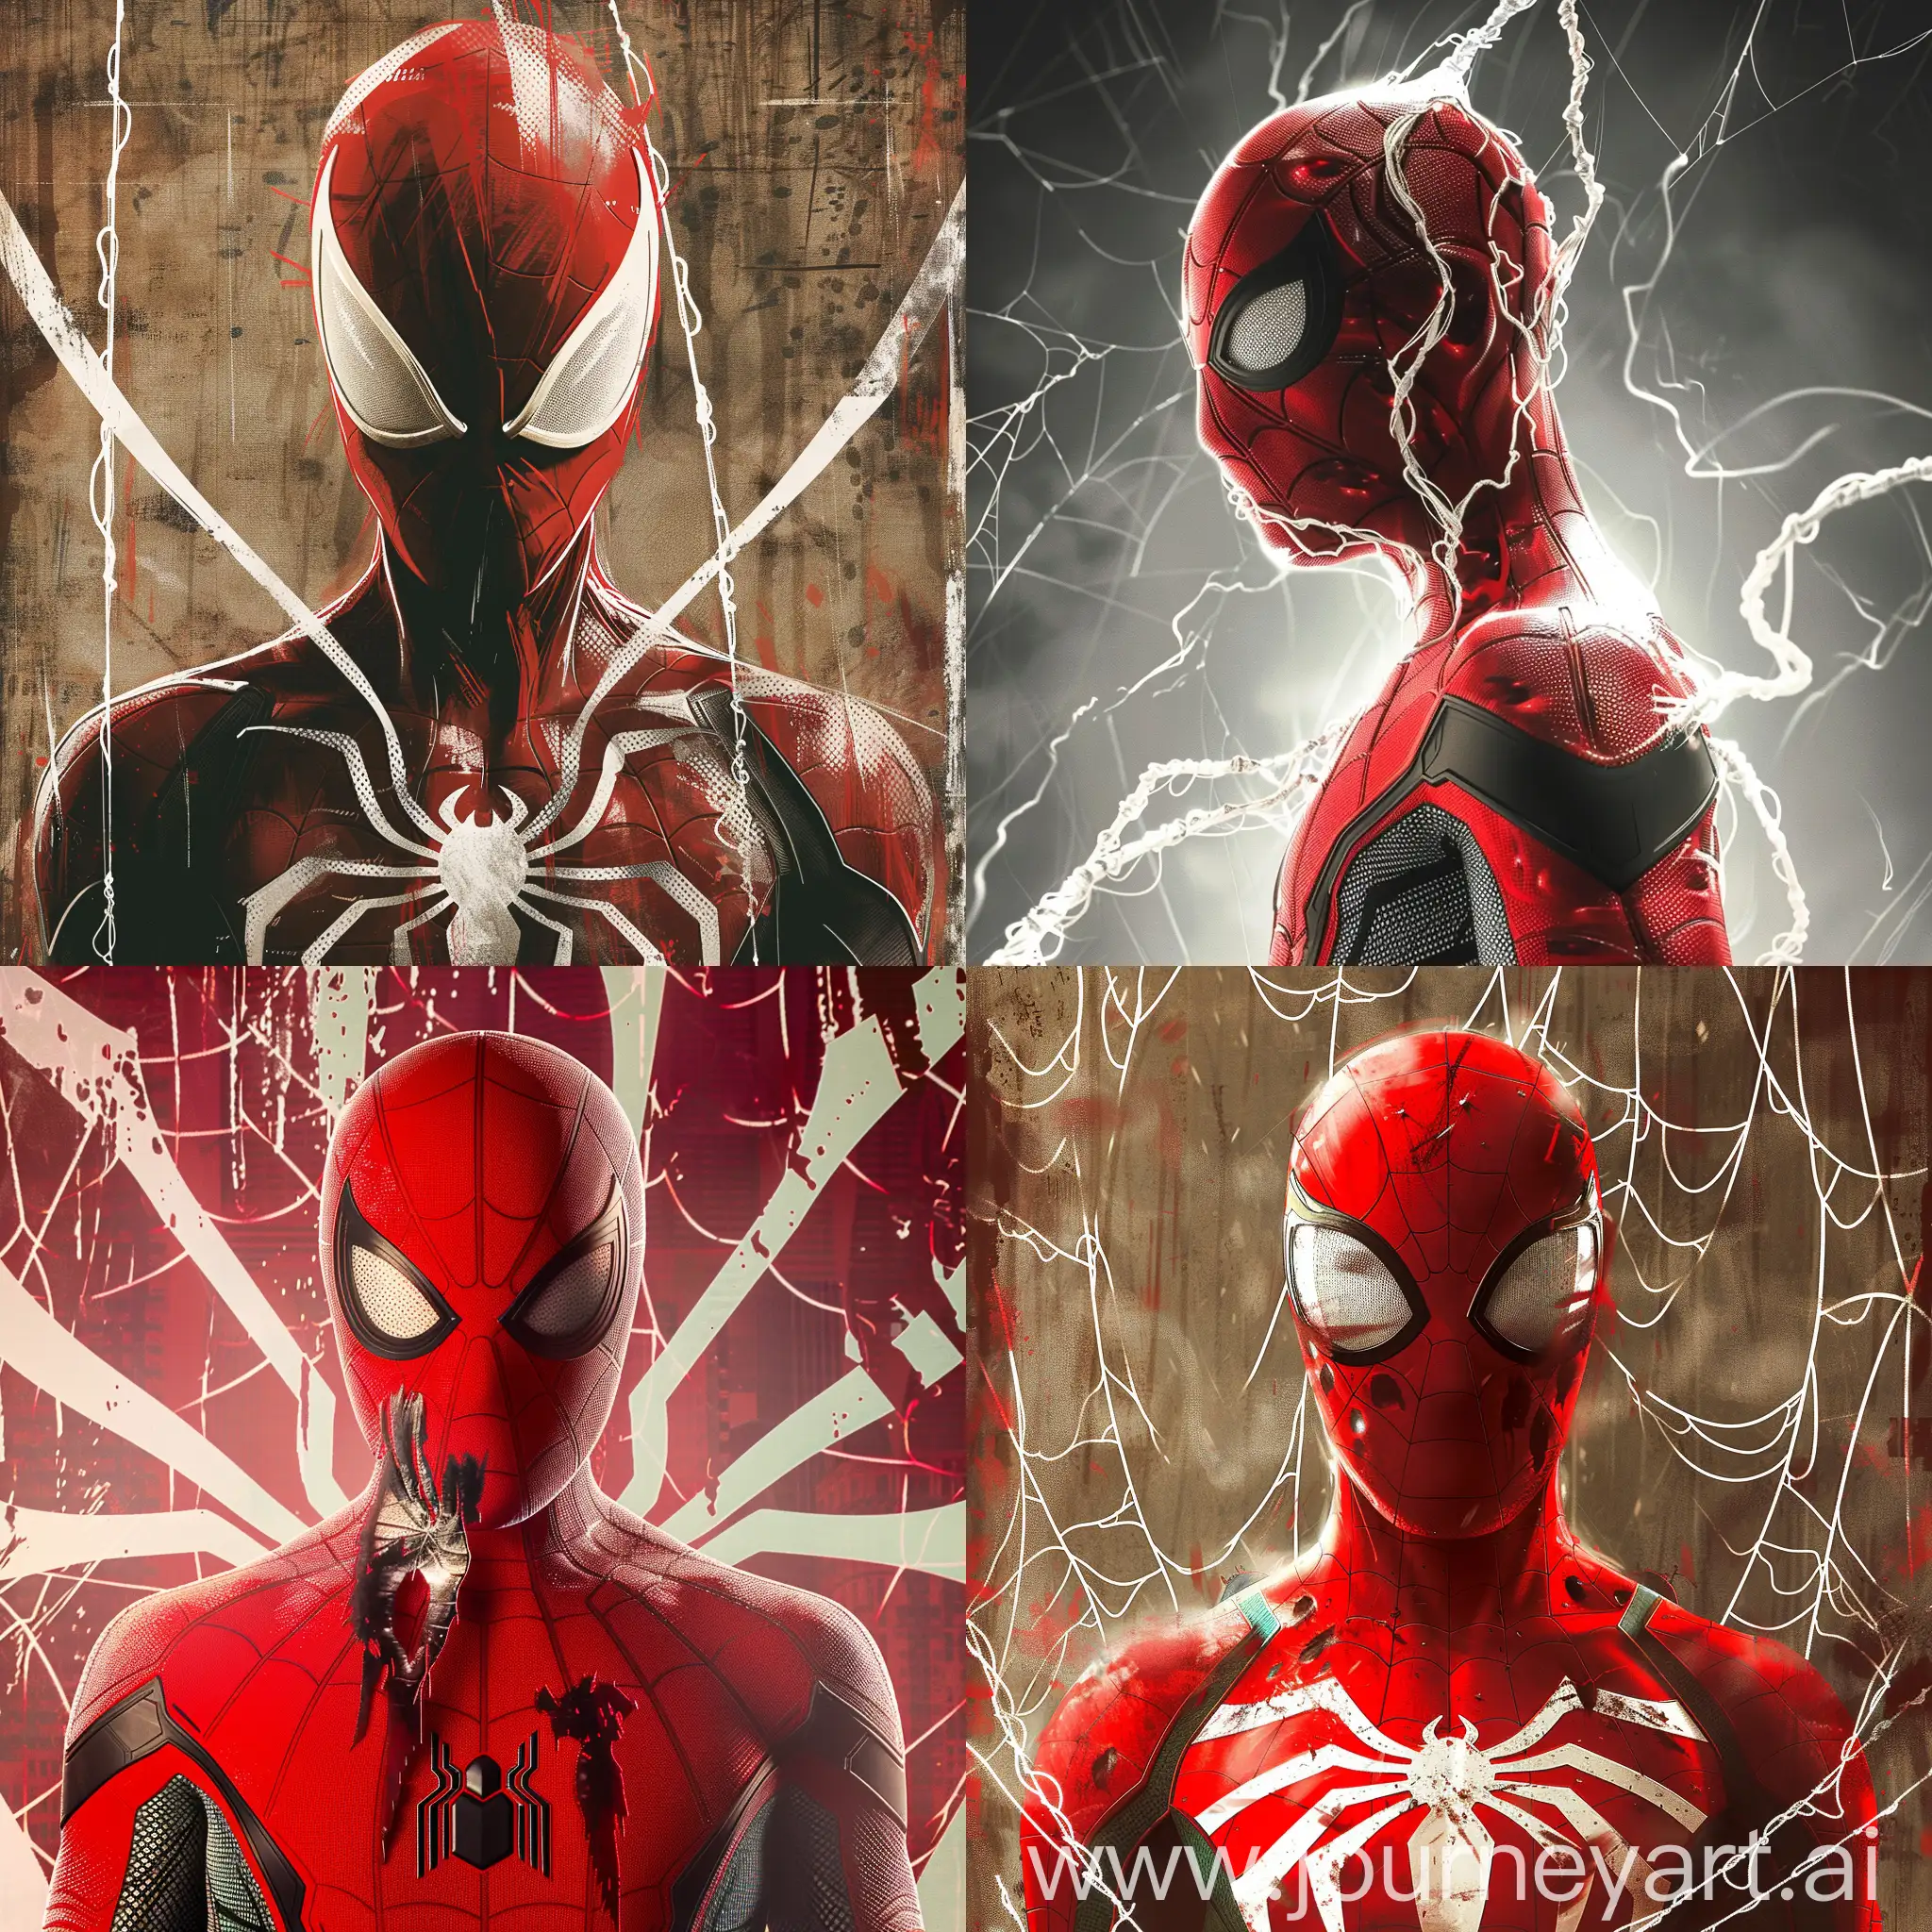 8k Cinematic movie poster , spider-man  advanced   suit with white long spider symbol with MCU Spider-Man mask is a red mask with too small very short mechanical movable expressive black and white eyelenses , web patterns.